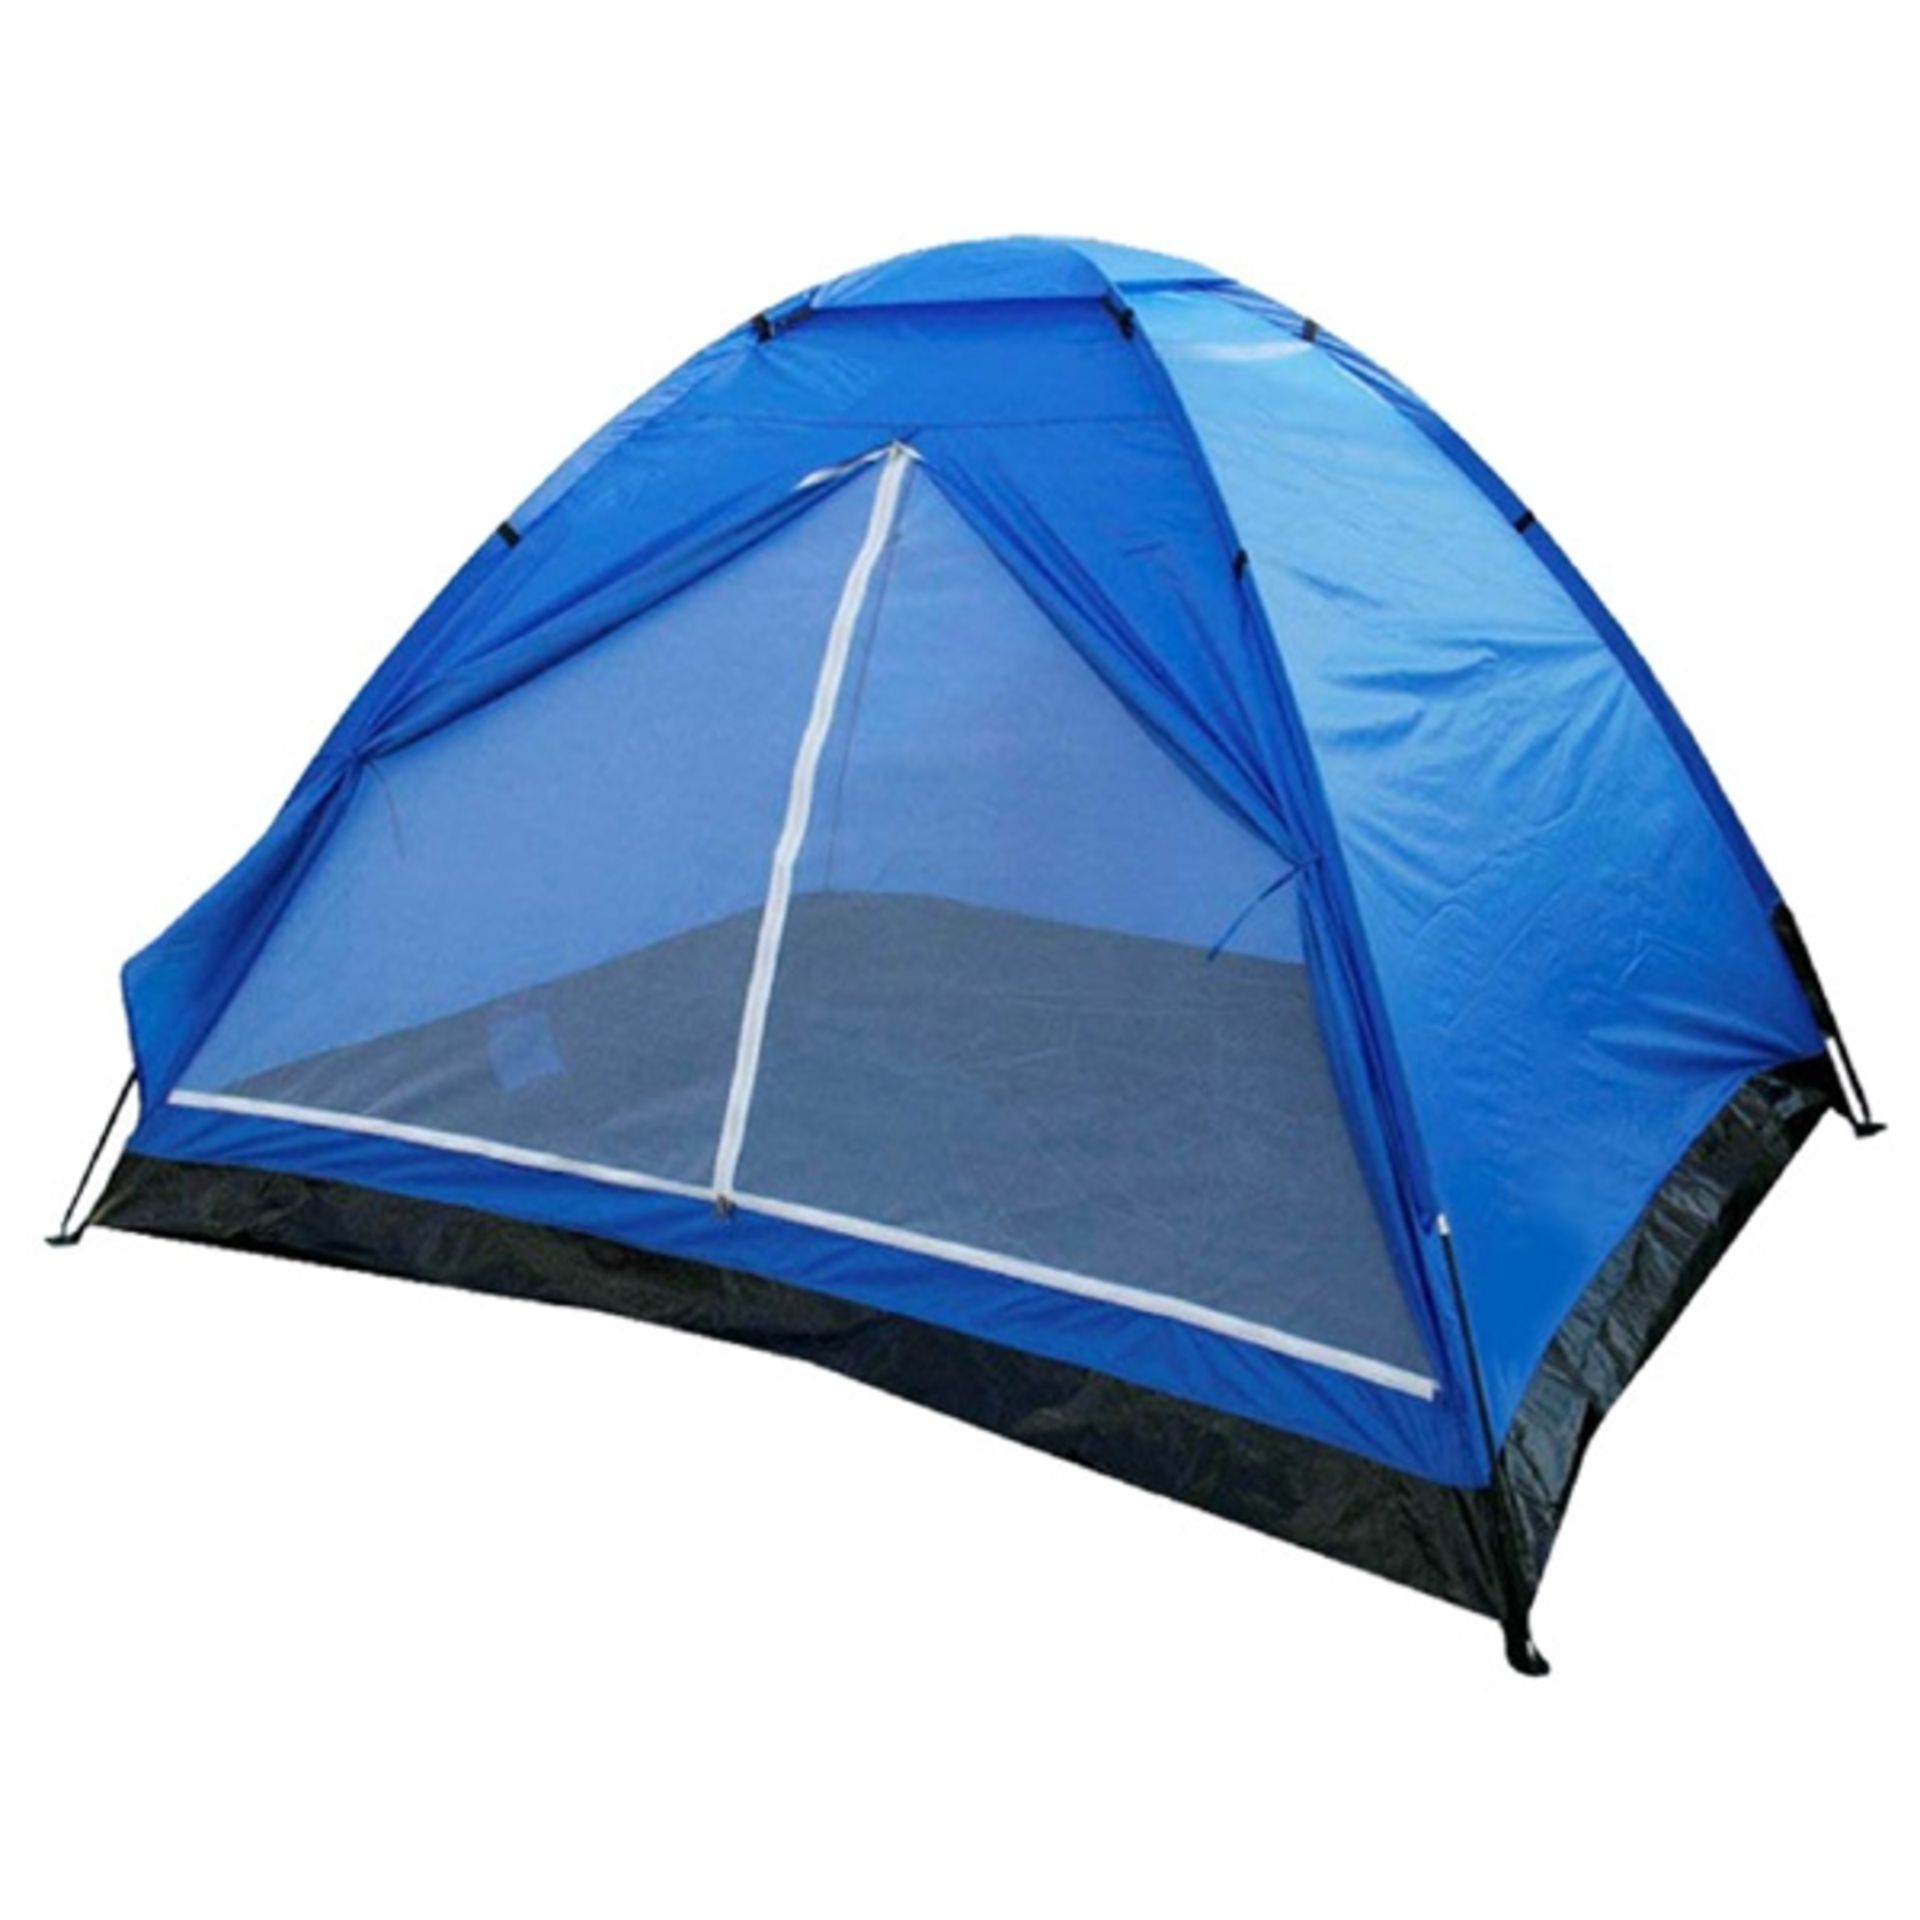 V Grade A Two Man Dome Tent In Carry Bag With Fibreglass Poles Built In Ground Sheet X  2  Bid price